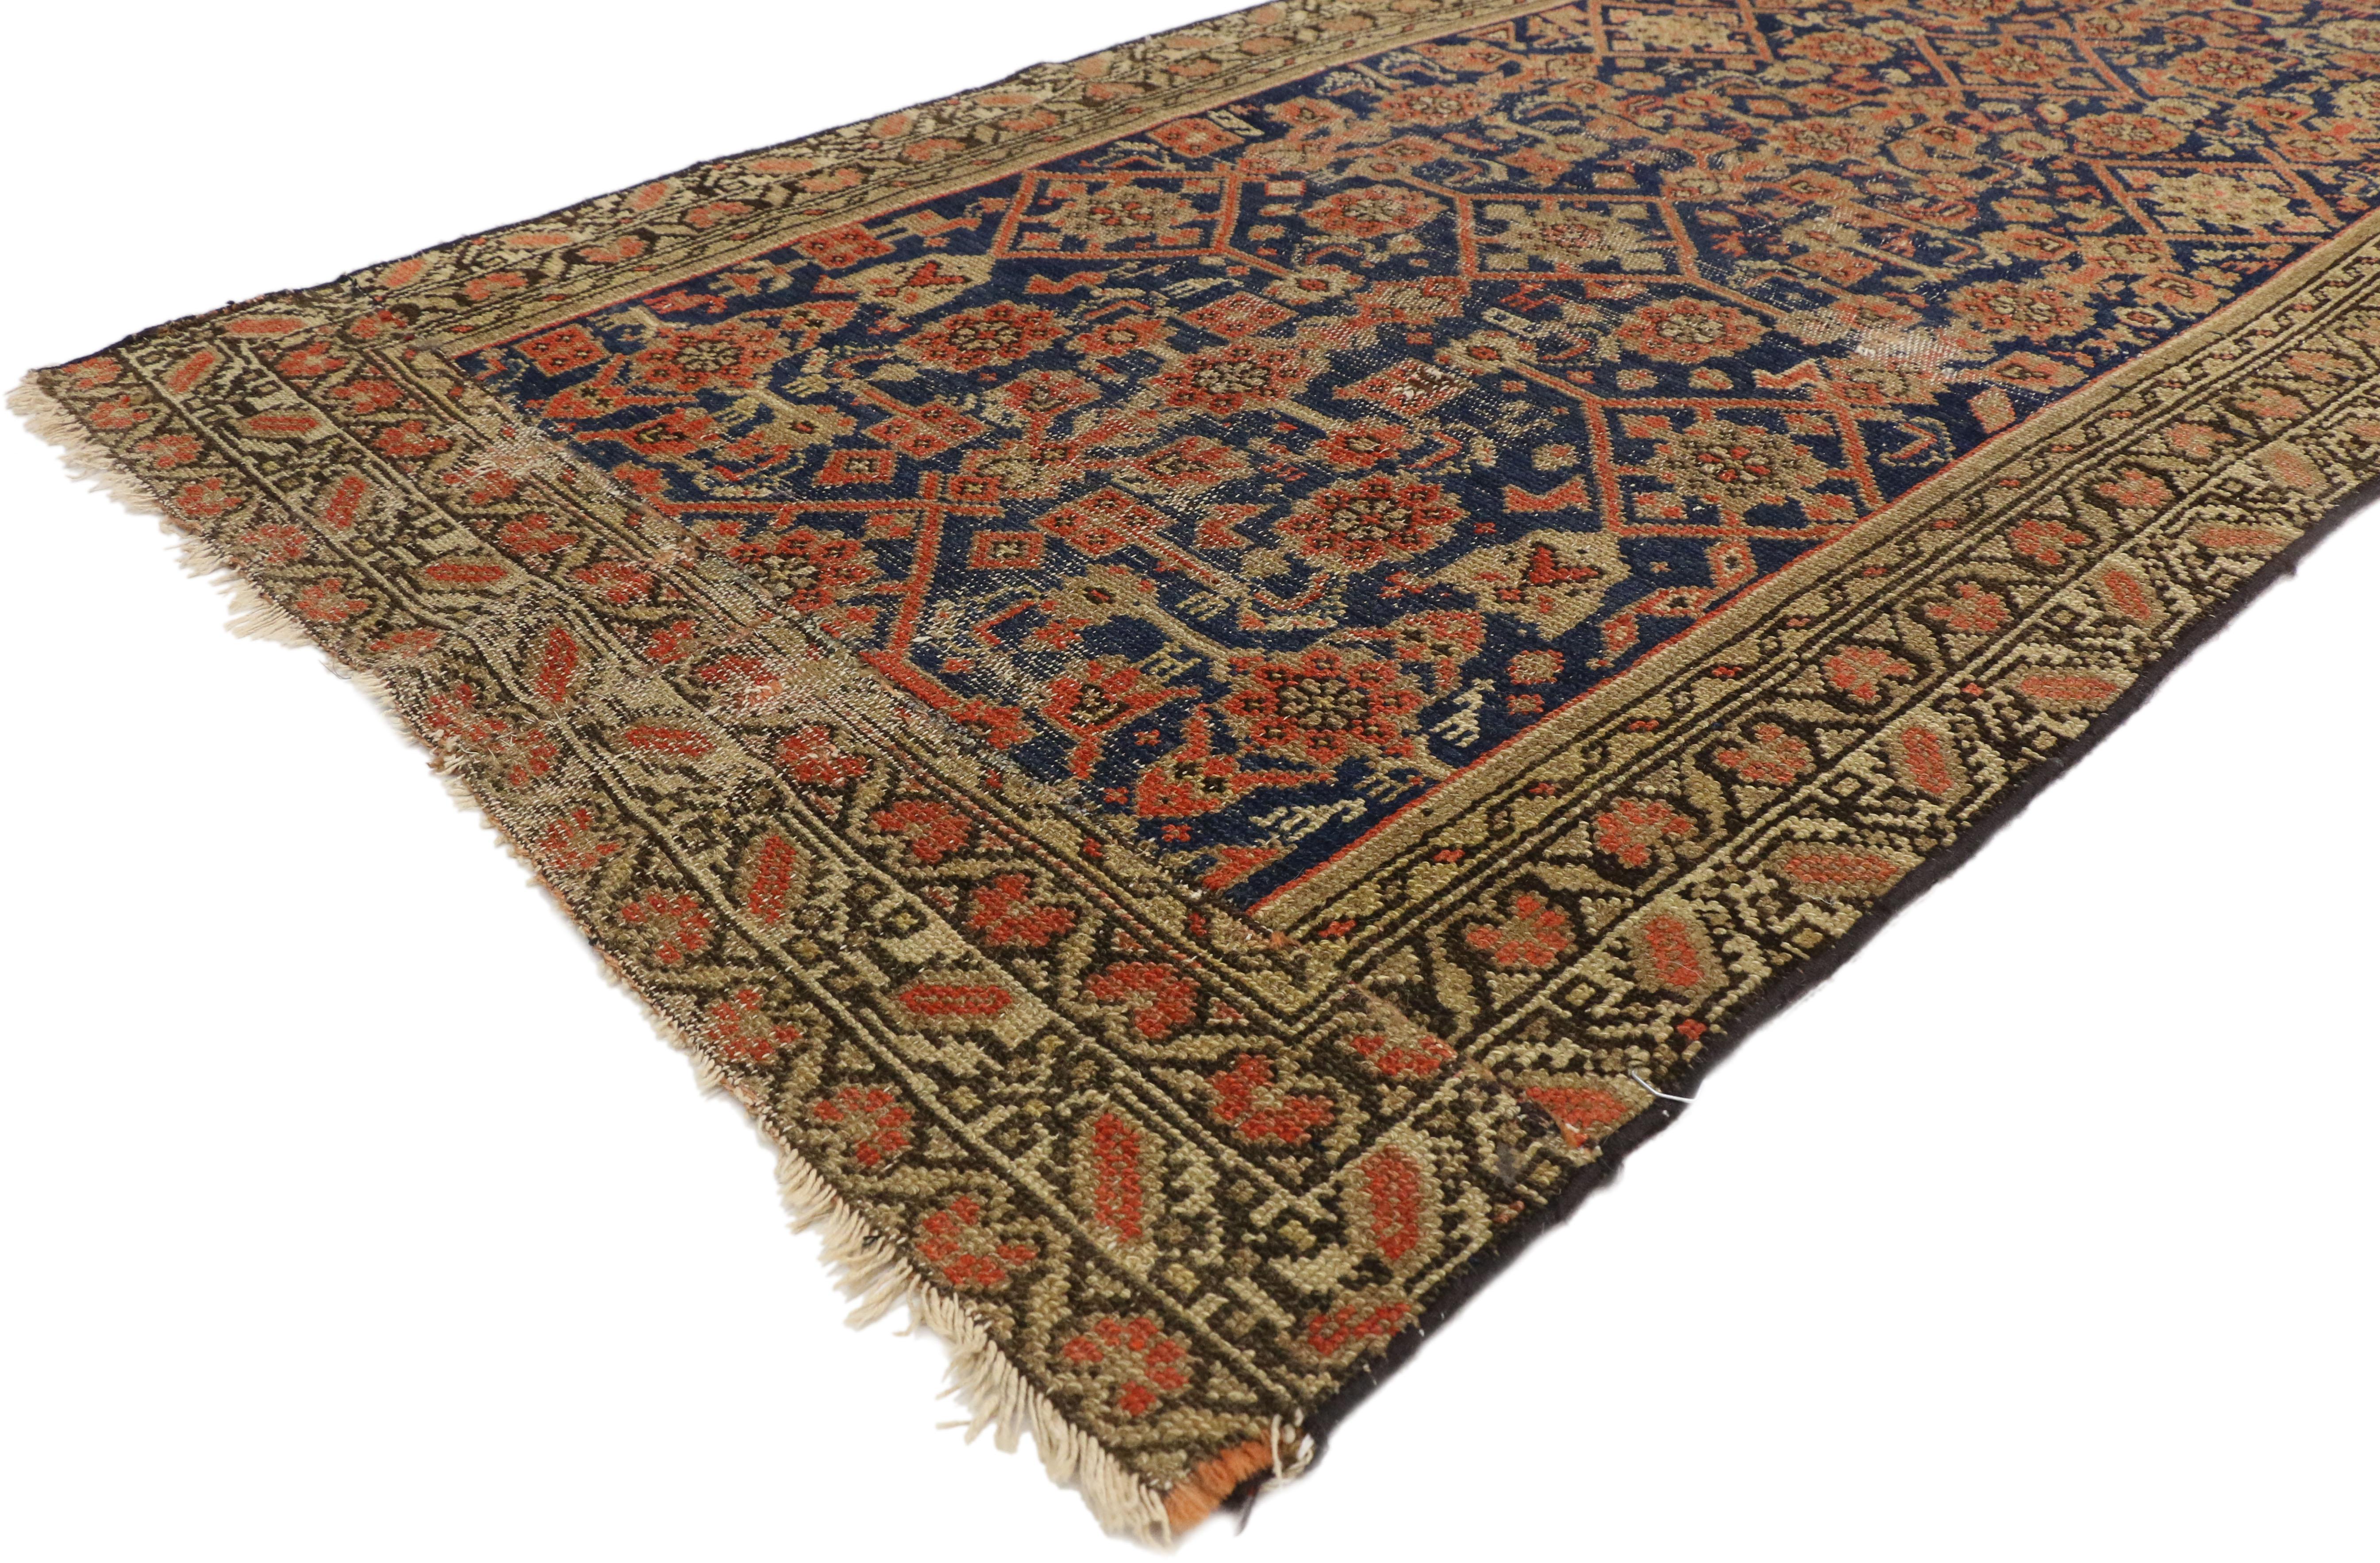 74454 Distressed Antique Persian Malayer Runner with Rustic Arts & Crafts Style, Hallway Runner 03'00 x 09'04. This hand knotted wool distressed antique Persian Malayer runner features a dynamic all-over Herati pattern dotted with animal motifs